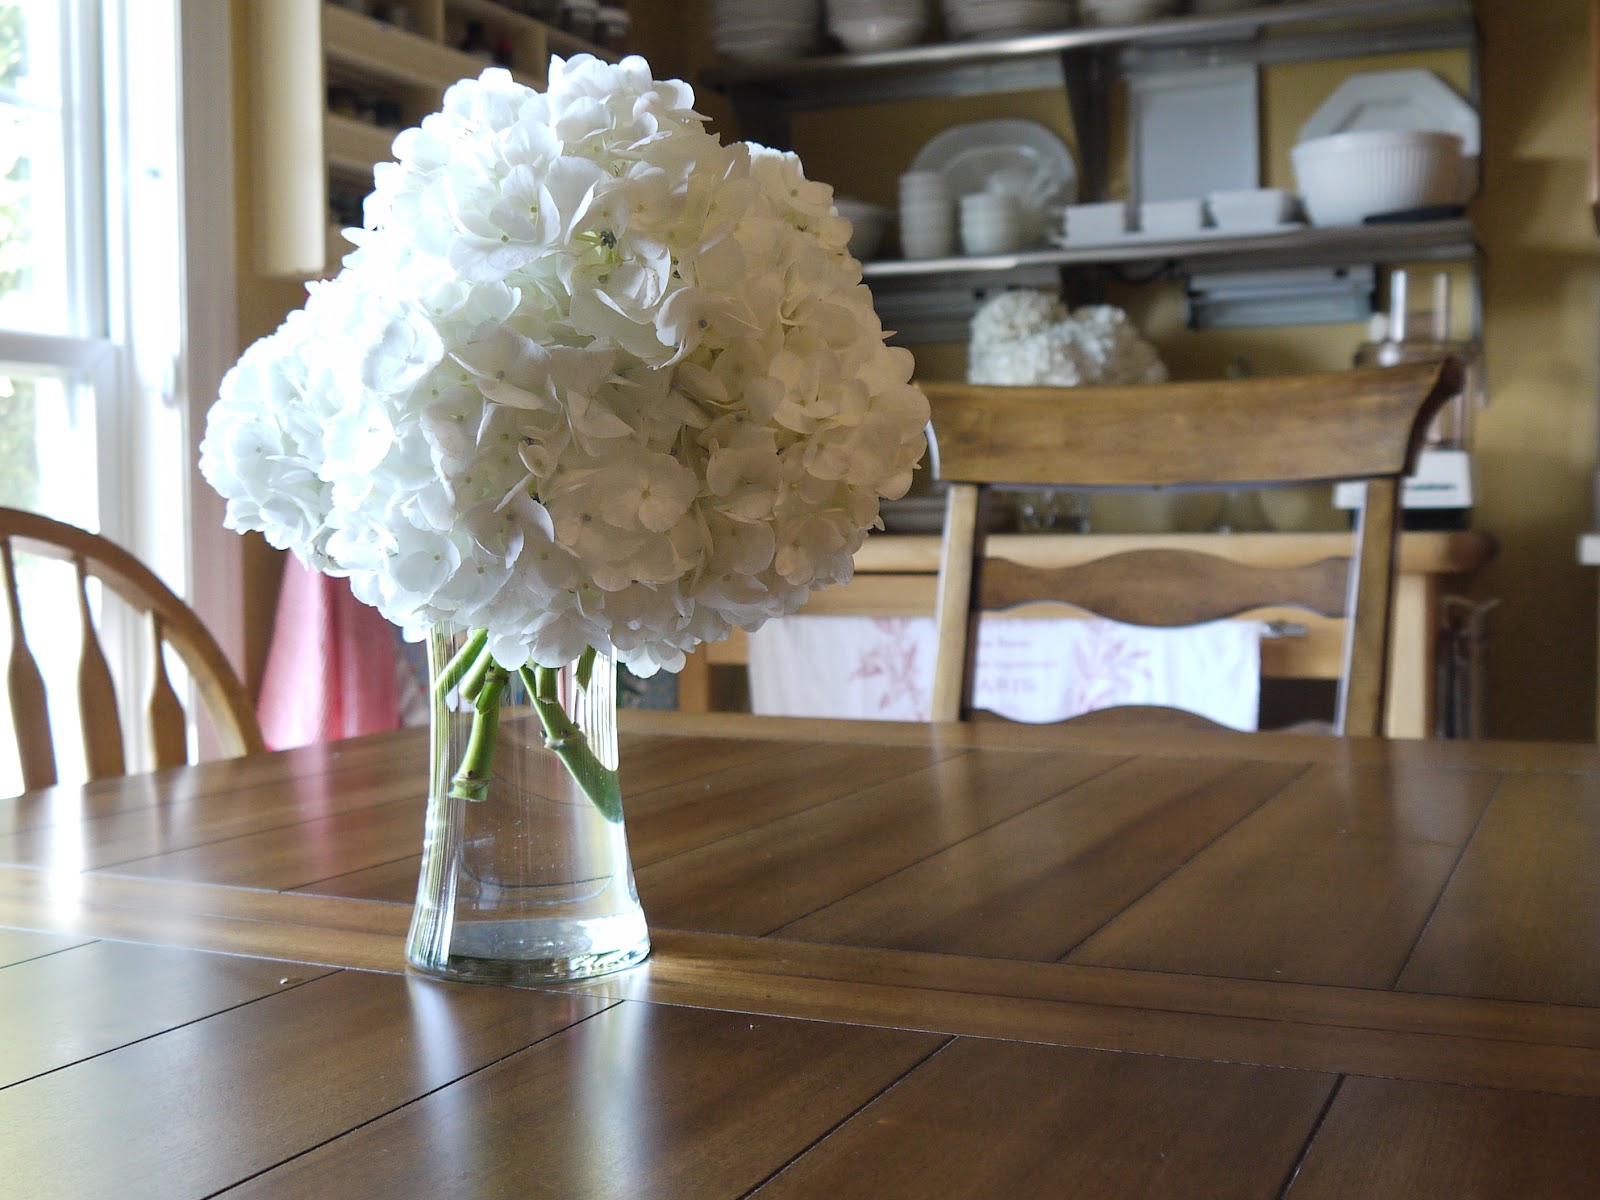 Farmhouse Chic Kitchen Table :: New-To-Us